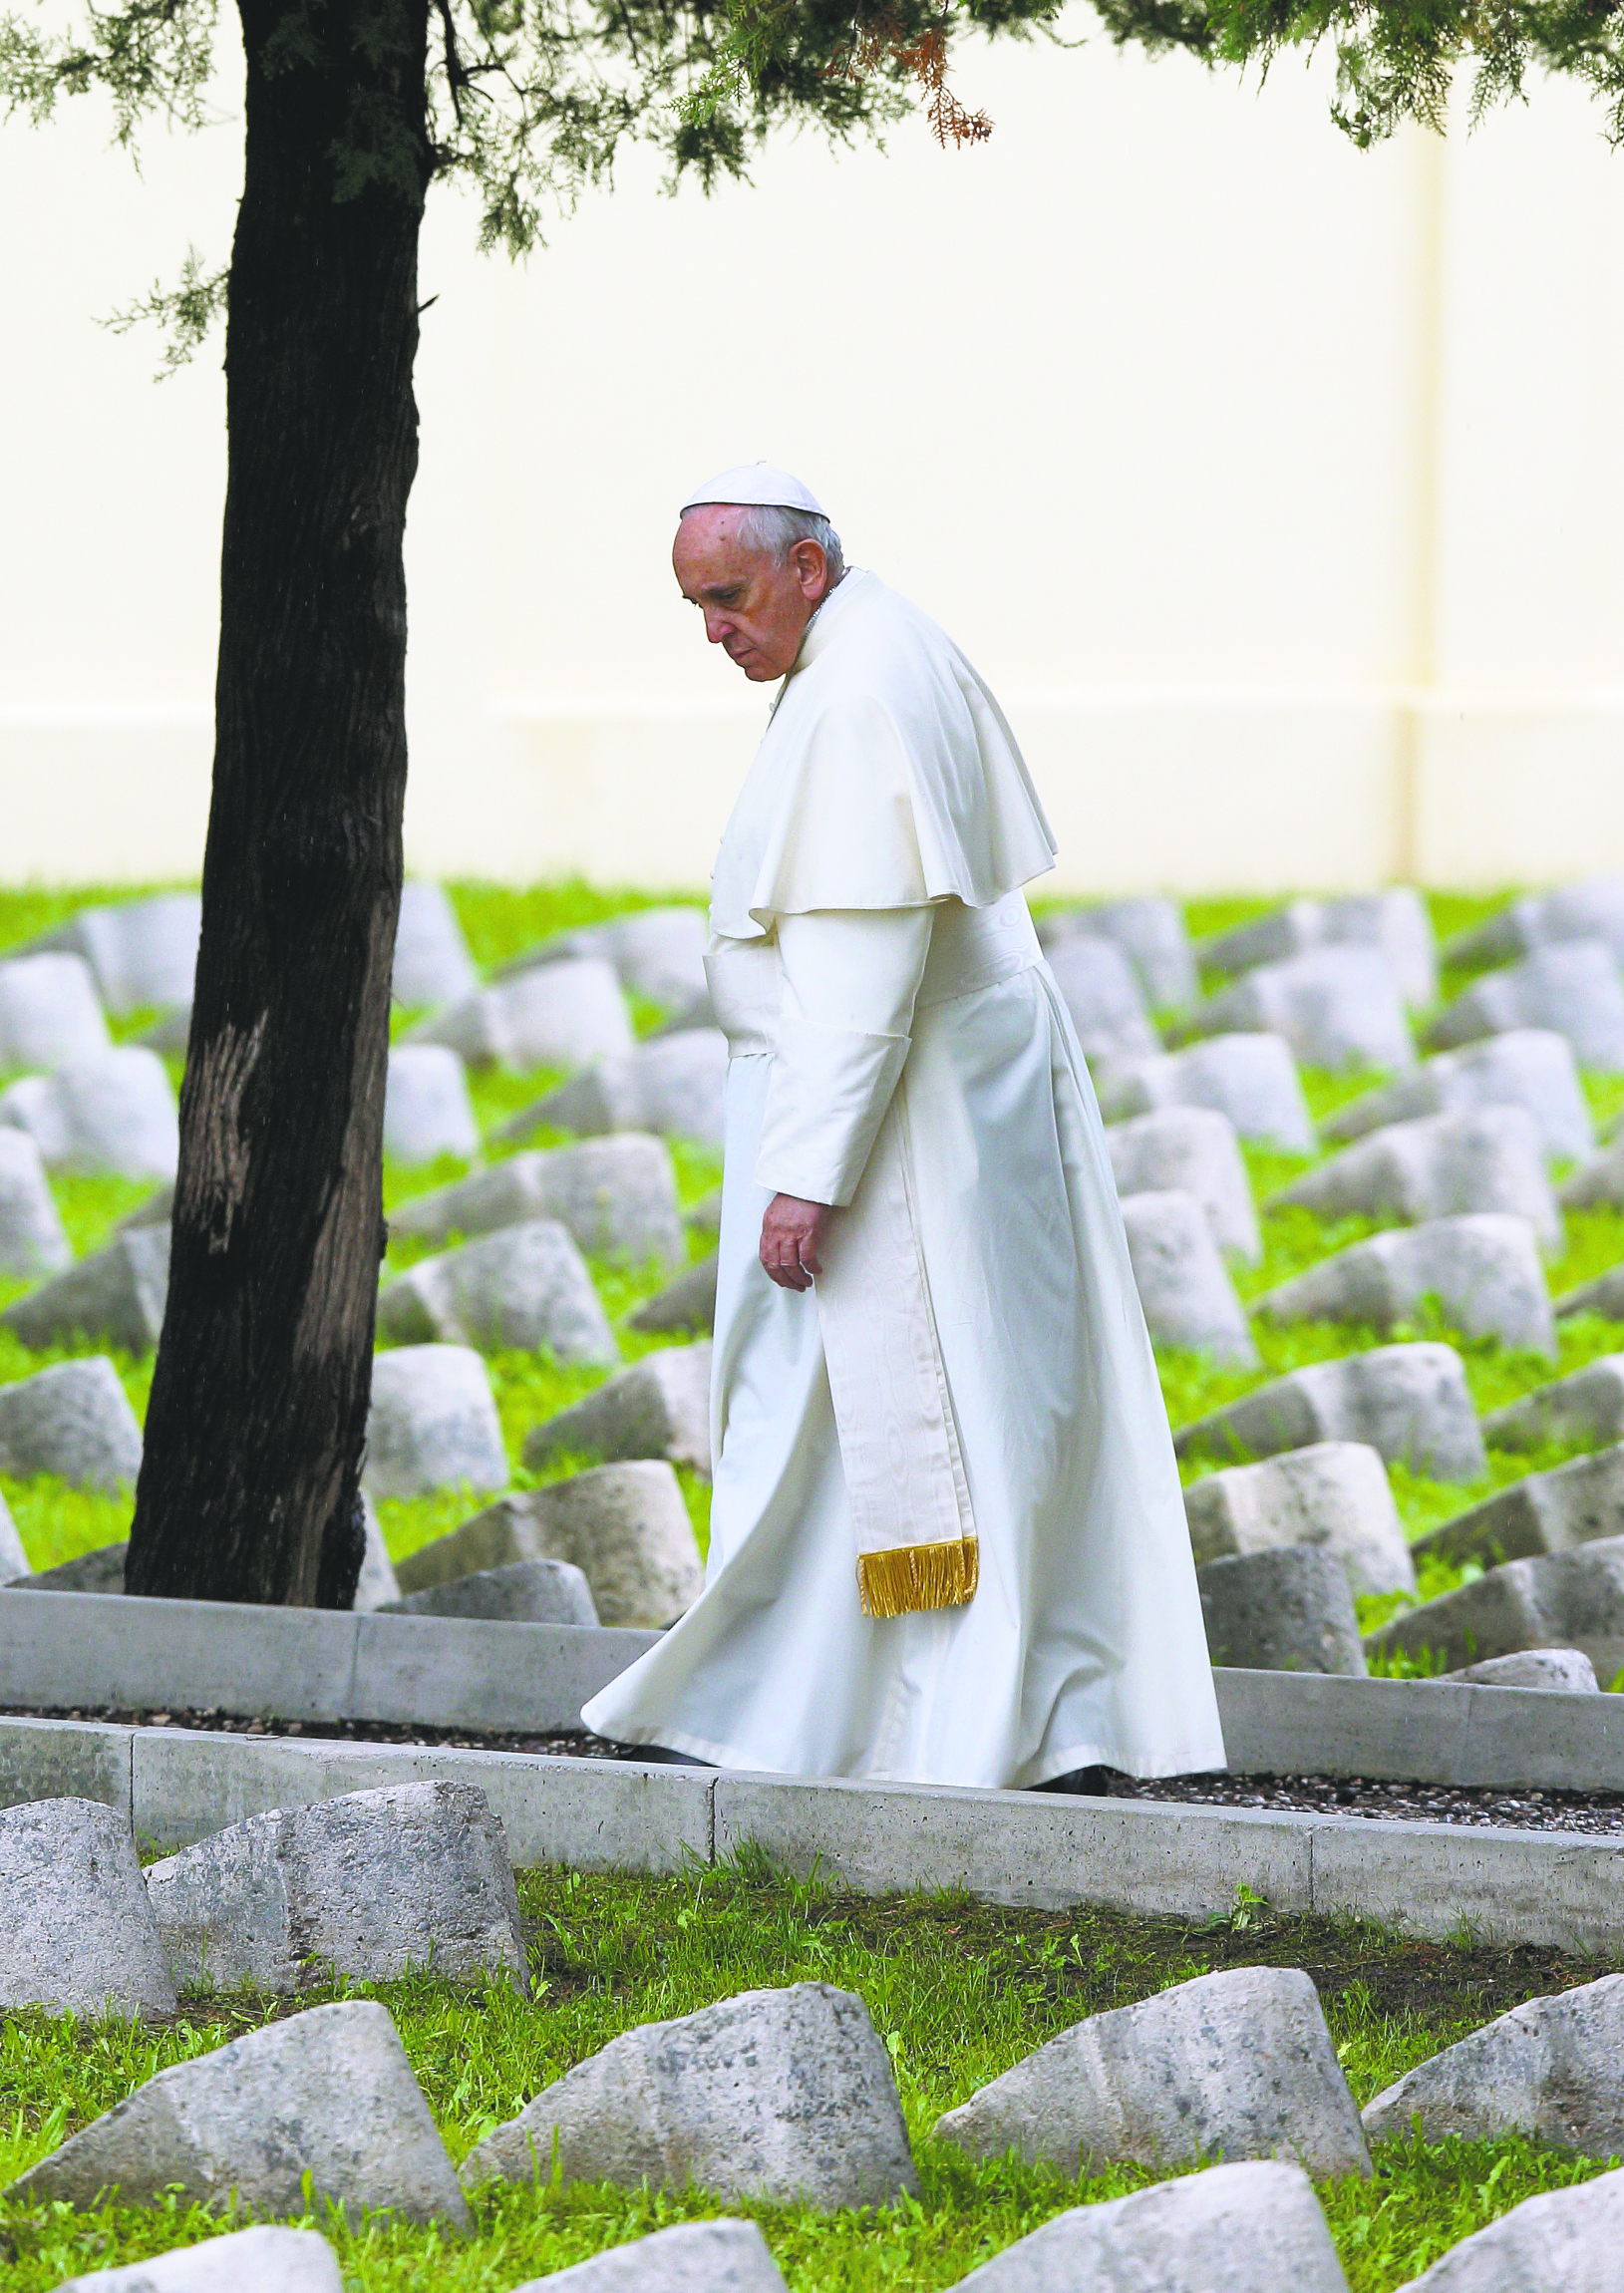 Pope Francis looks at tombstones as he walks through Austro-Hungarian cemetery for World War I soldiers in Italy